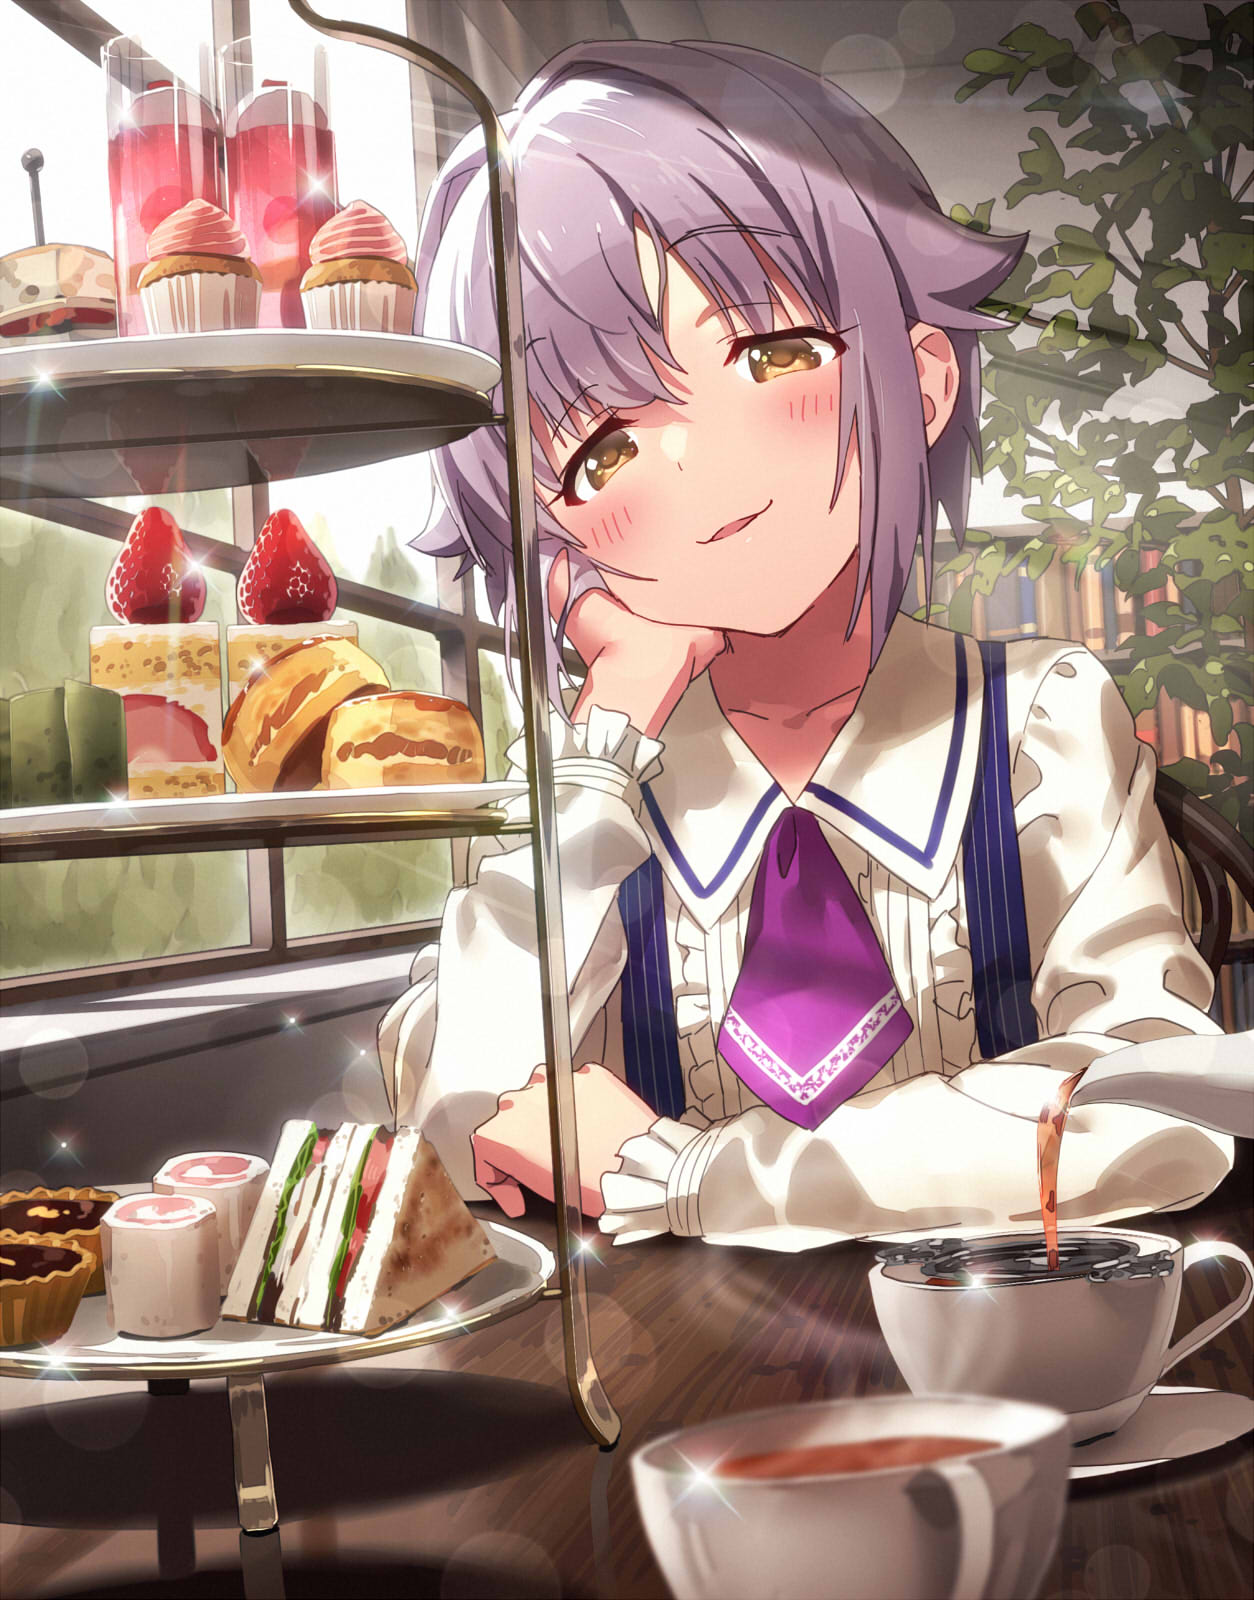 1girl alternate_costume bangs blush brown_eyes cake commentary_request cup cupcake eyebrows eyebrows_visible_through_hair food fruit head_rest highres idolmaster idolmaster_cinderella_girls koshimizu_sachiko lavender_hair long_sleeves open_mouth pastry plate sandwich saucer short_hair sitting smile solo sonsoso strawberry table tea teacup teapot tray